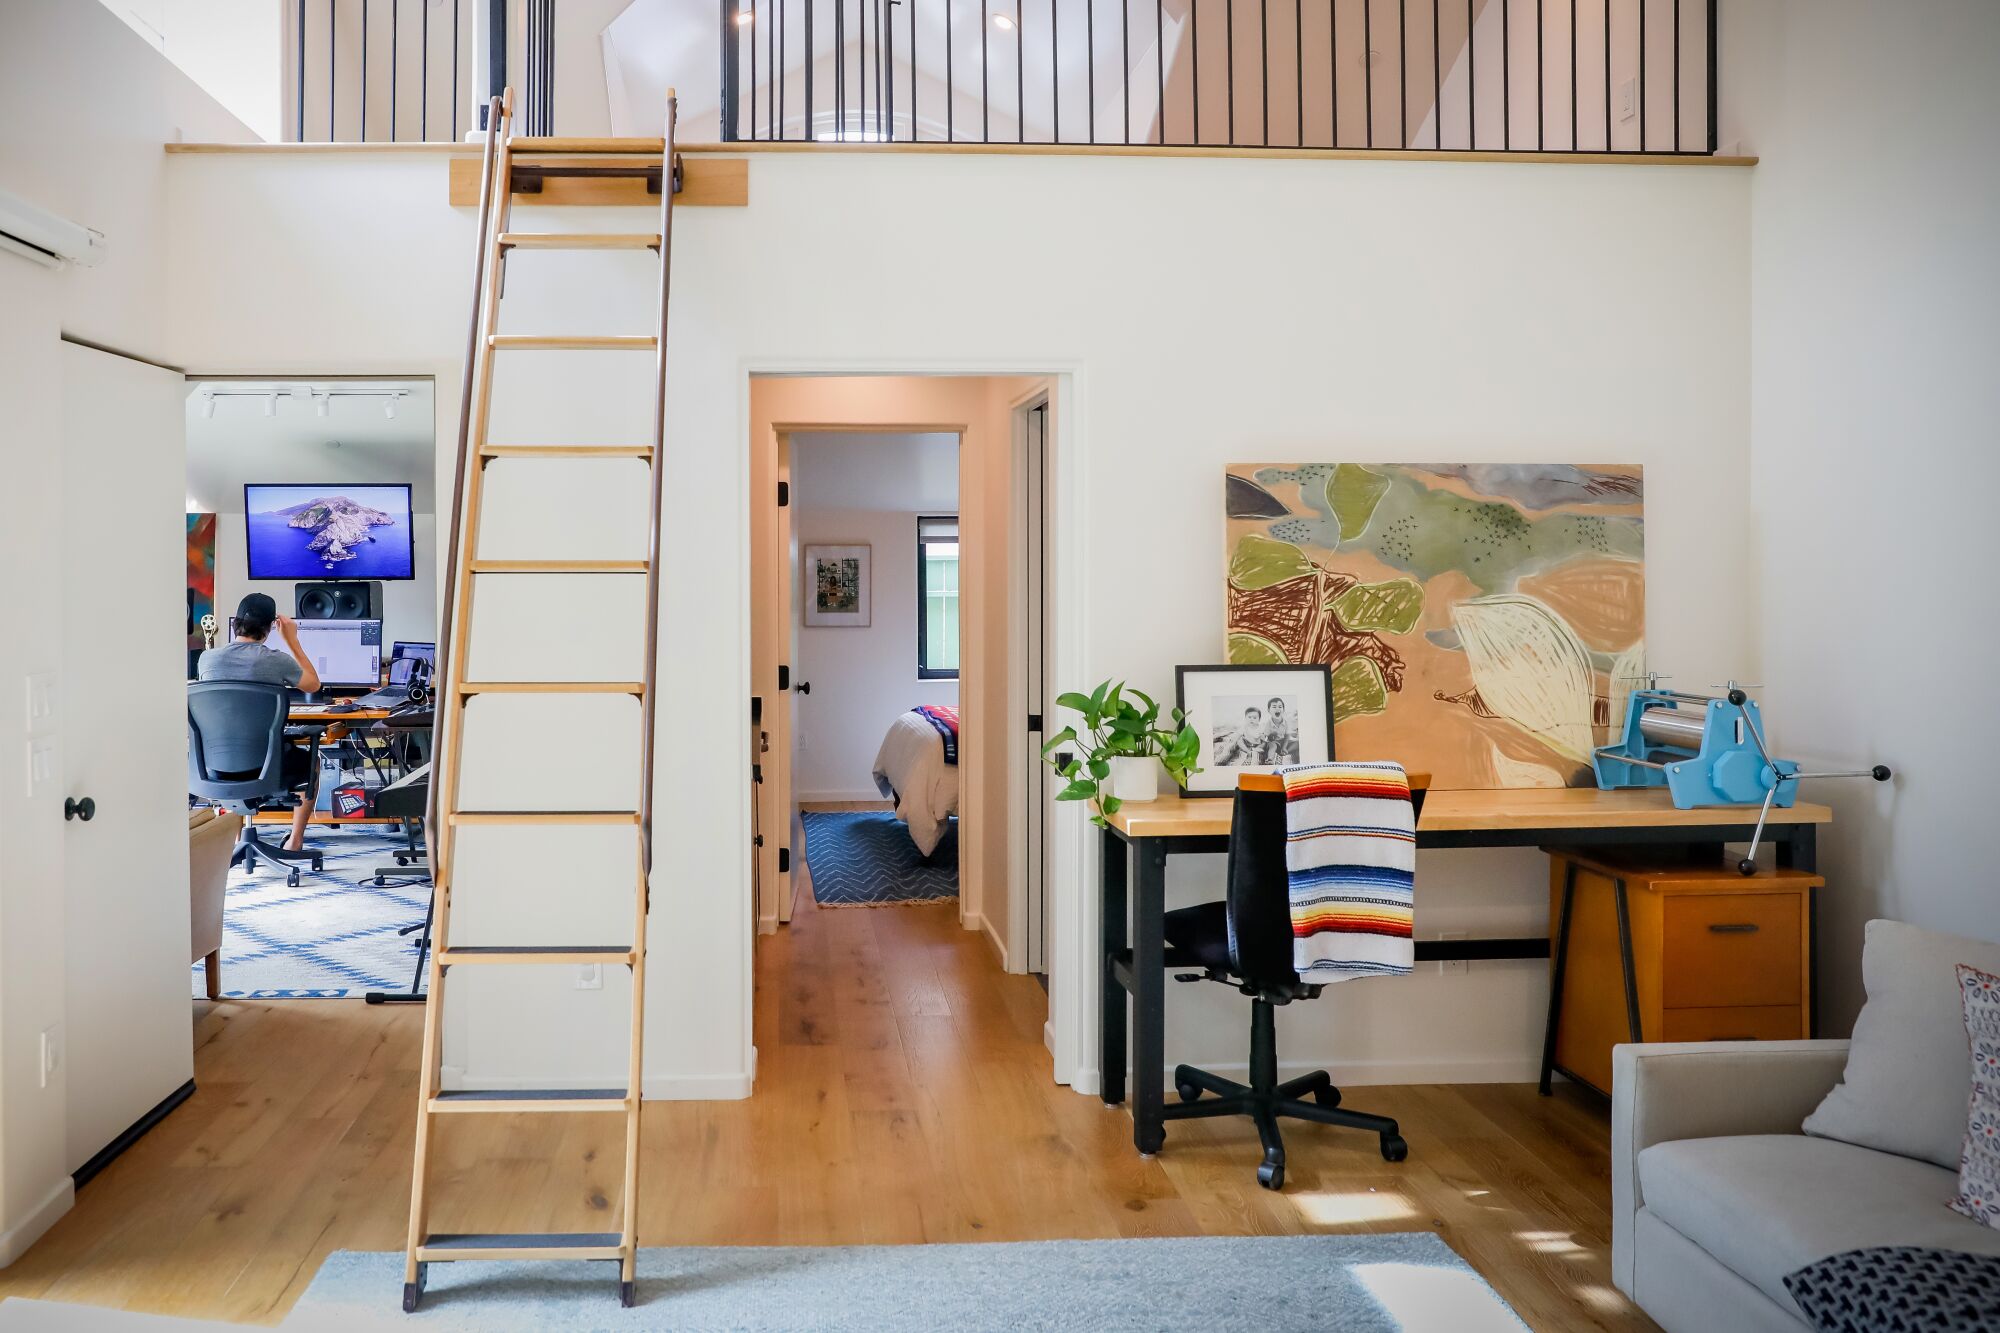 View of a ladder leading to a loft, and a door leading to an office with a man working next to the loft